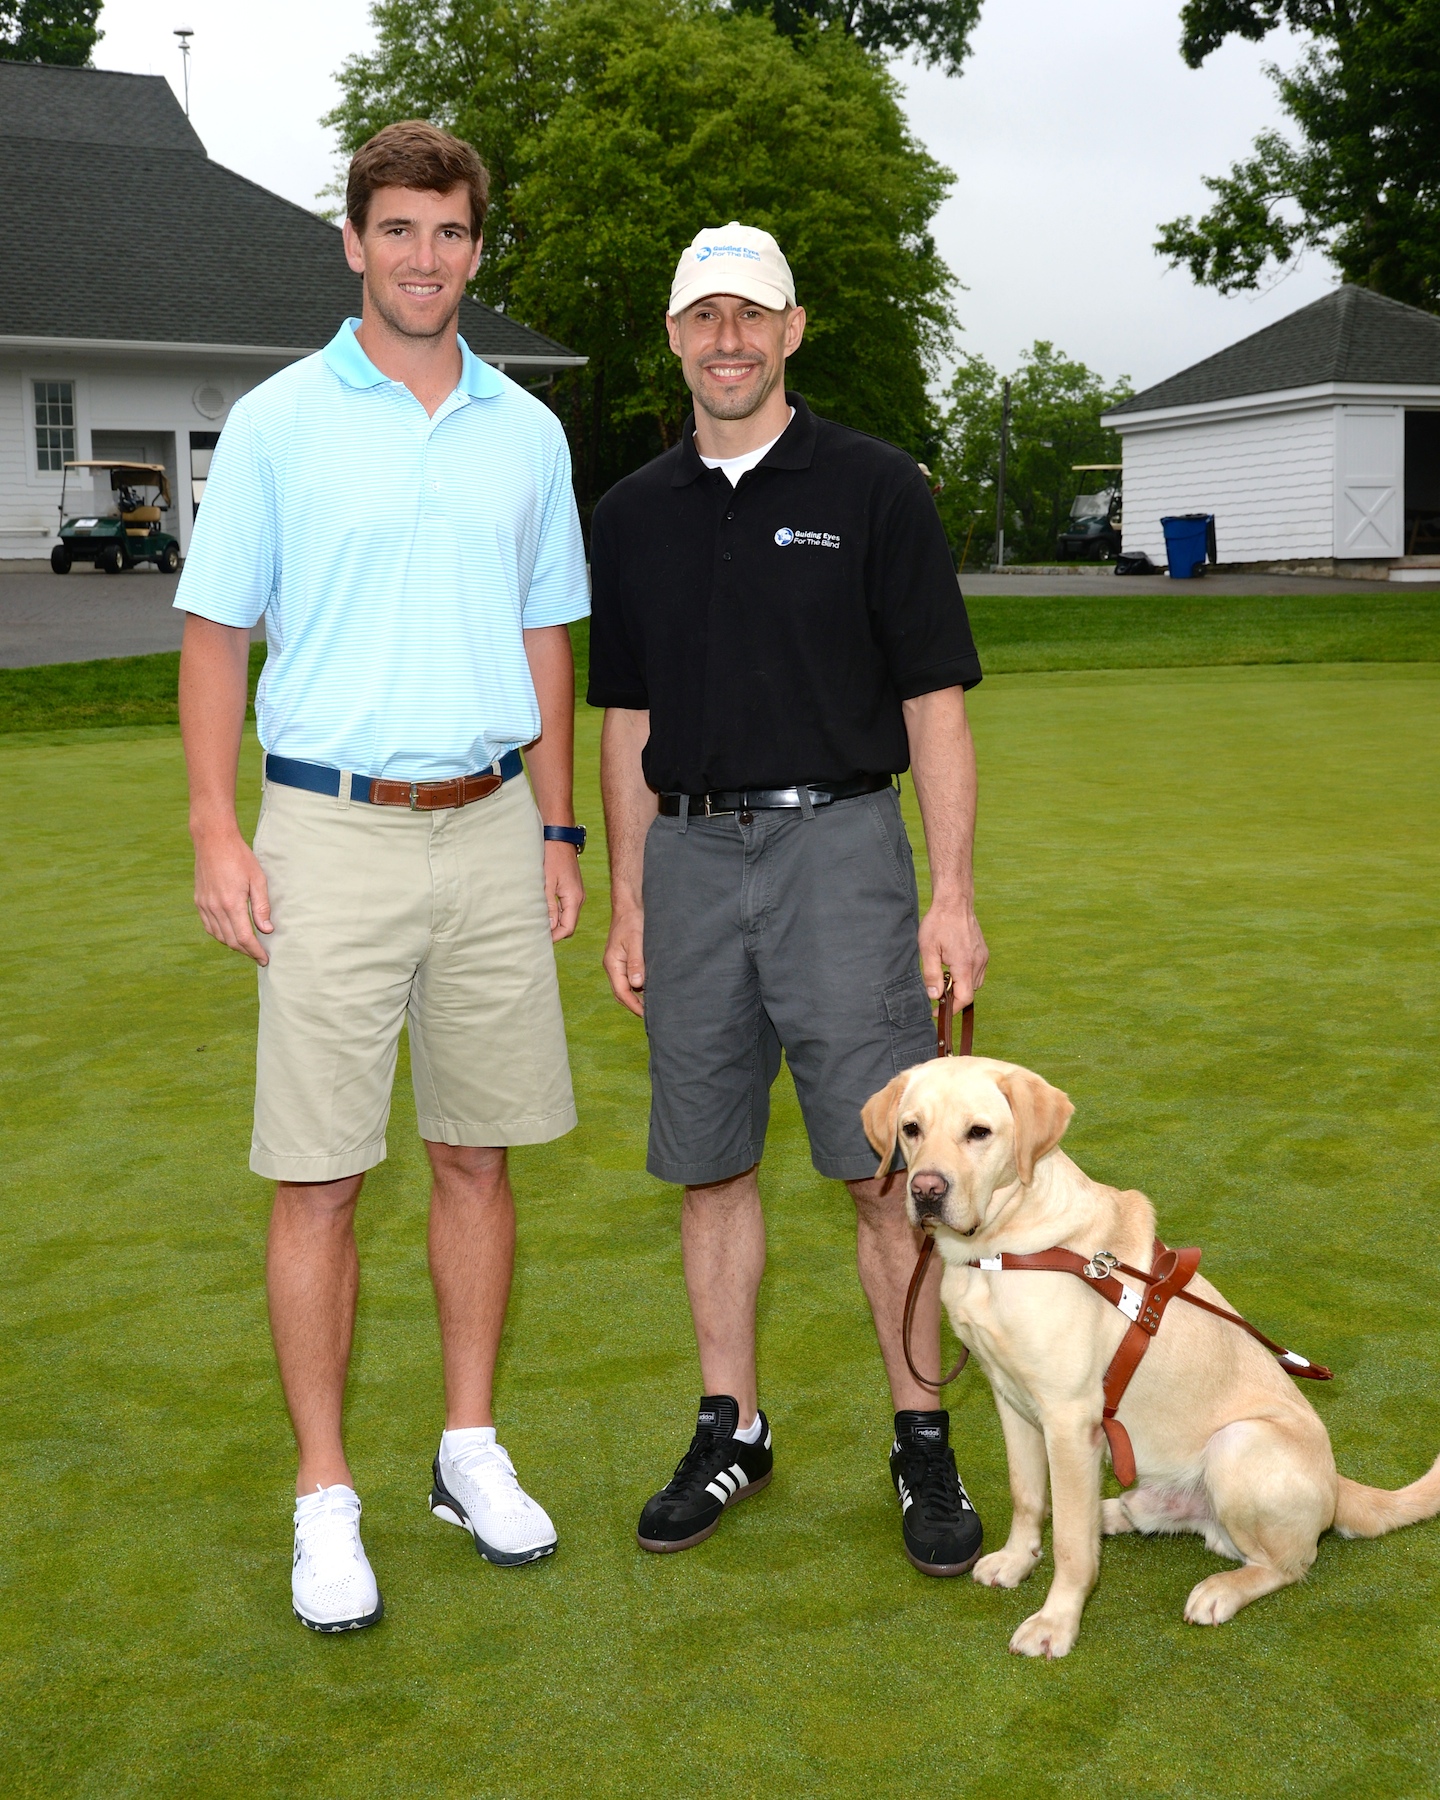 NY Giants Quarterback Eli Manning and Guiding Eyes’ president & CEO Thomas Panek (of South Salem) with Guiding Eyes Gus at the 37th annual Guiding Eyes for the Blind Golf Classic.